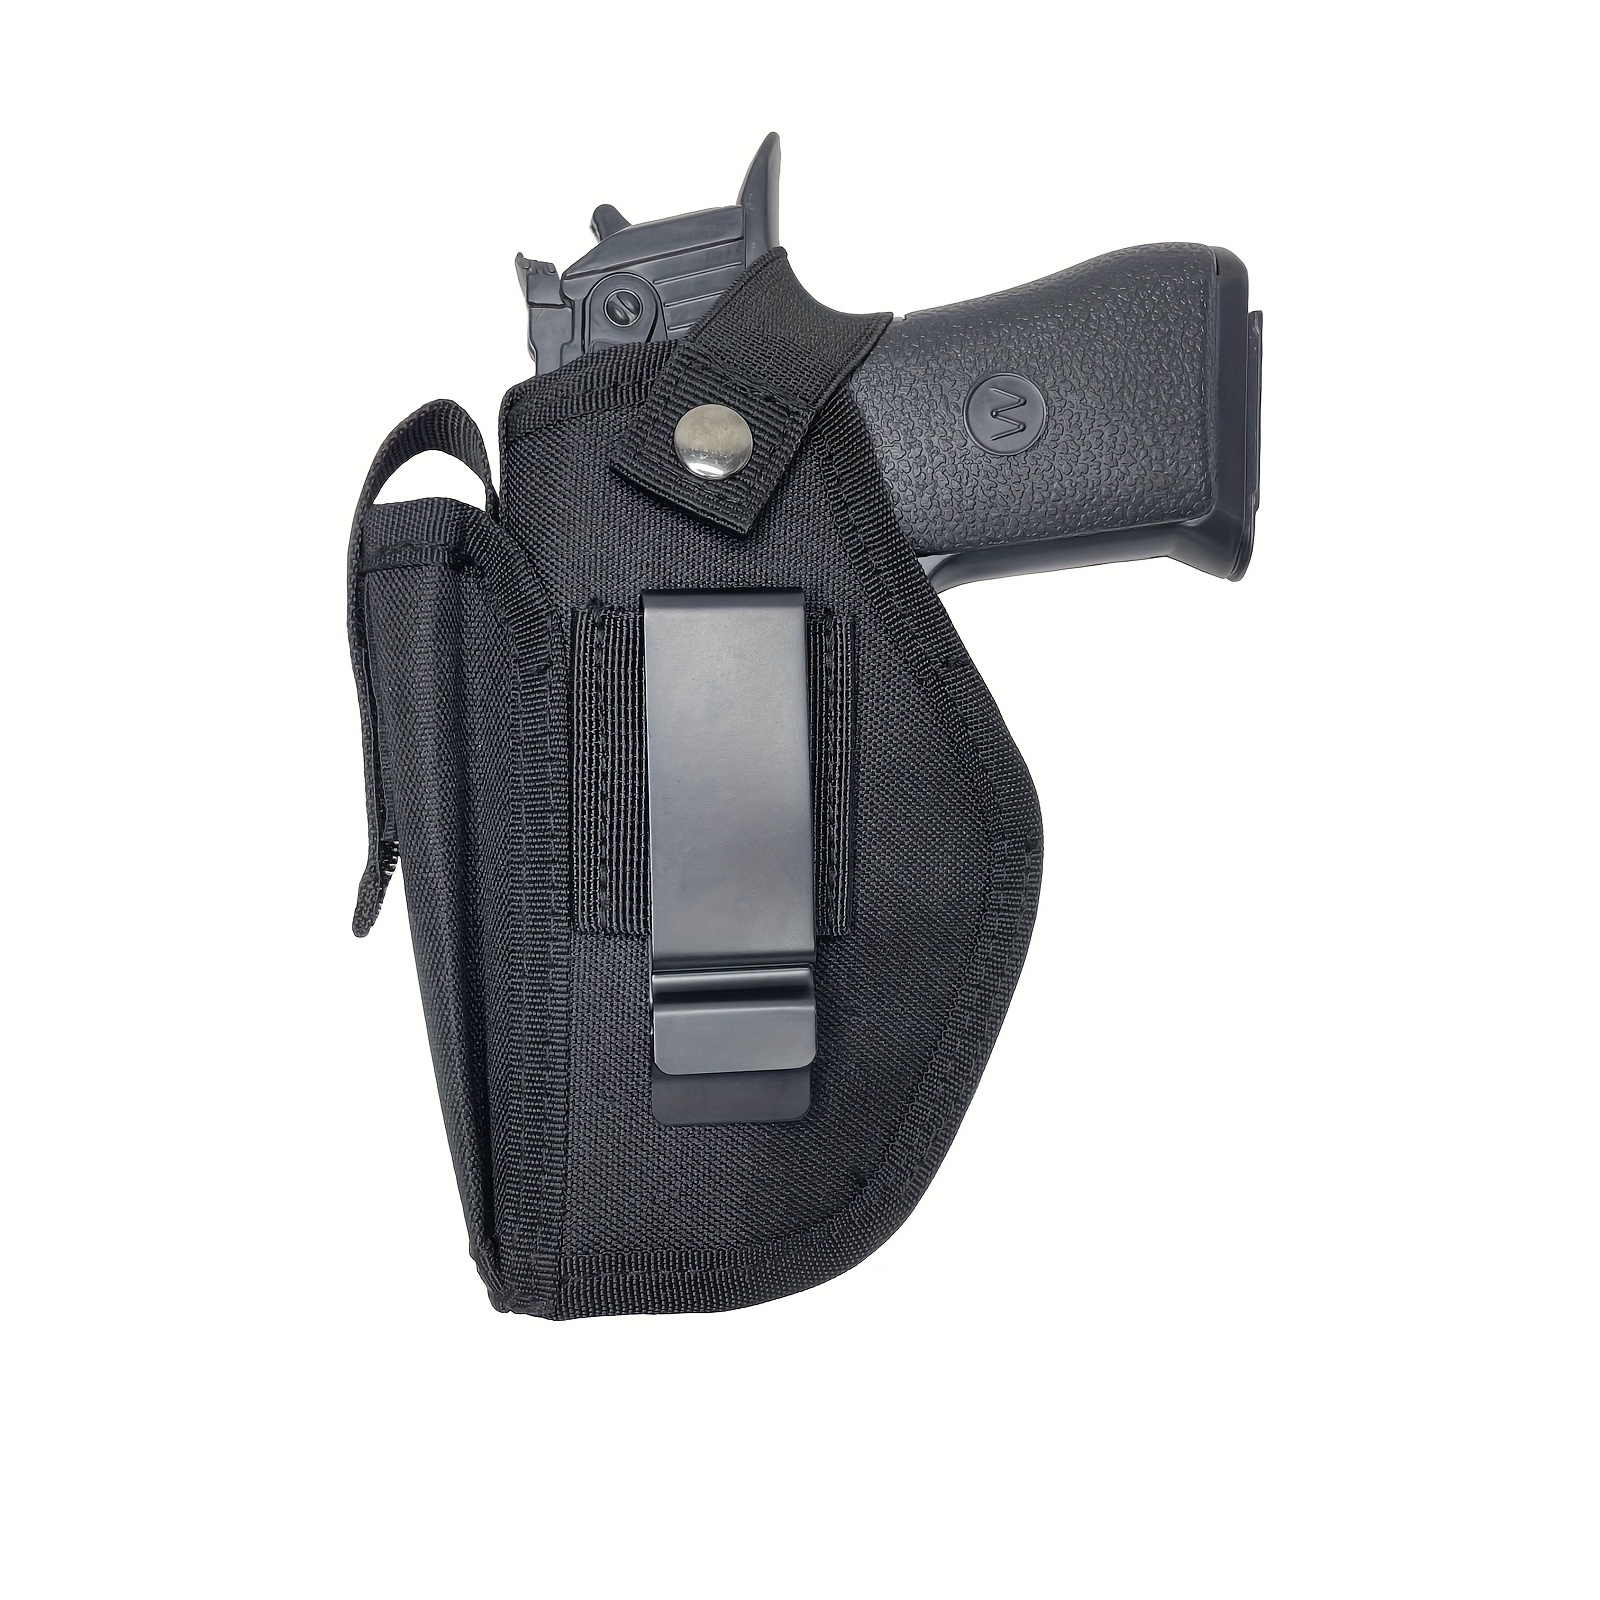  PRETTYGAGA Concealed Carry Gun Holster - IWB/OWB with Magazine  - Fits Subcompact, Compact, and Full Size Pistols - Right/Left Hand Draw -  for Men and Women Black : Sports & Outdoors